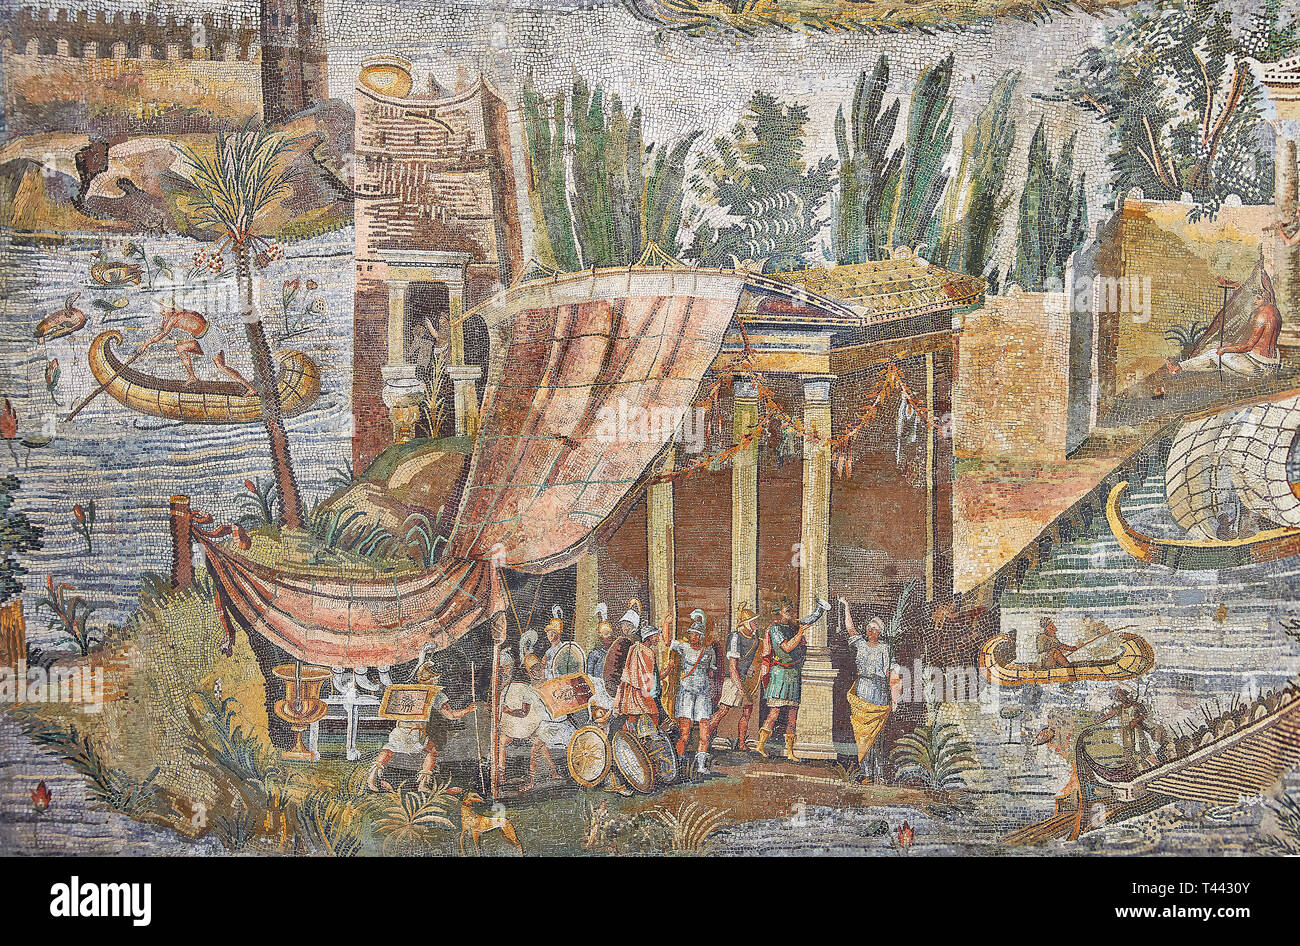 Detail picture of a temple surrounded by the flooded Nile  from the famous Roman Hellenistic Nilotic landscape Roman Palestrina Mosaic or Nile mosaic  Stock Photo